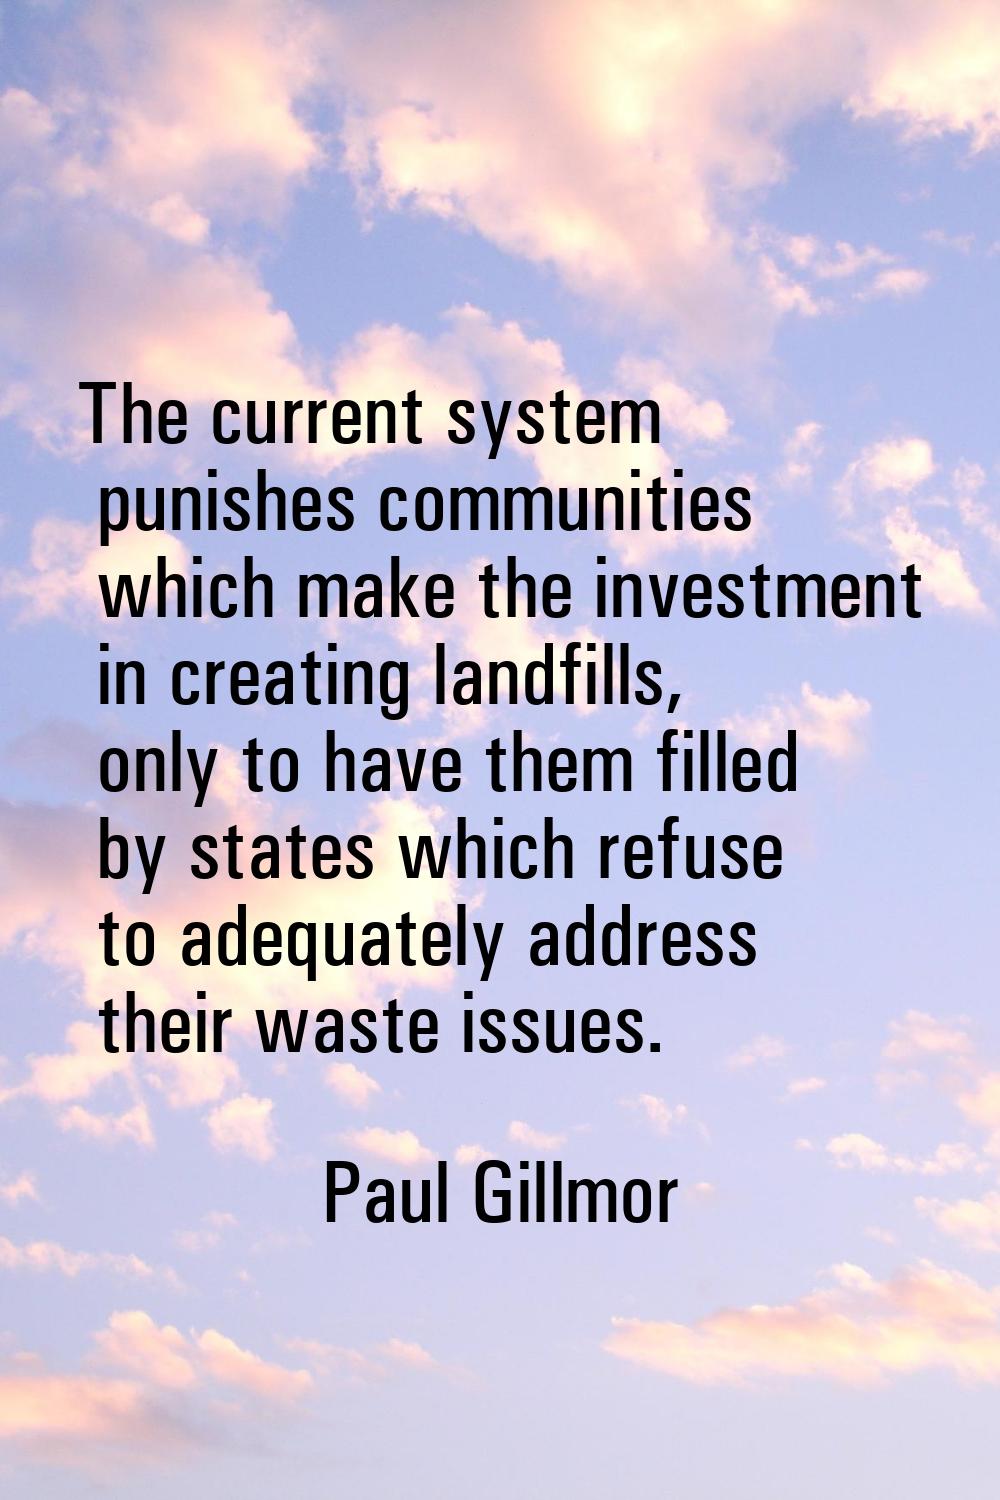 The current system punishes communities which make the investment in creating landfills, only to ha